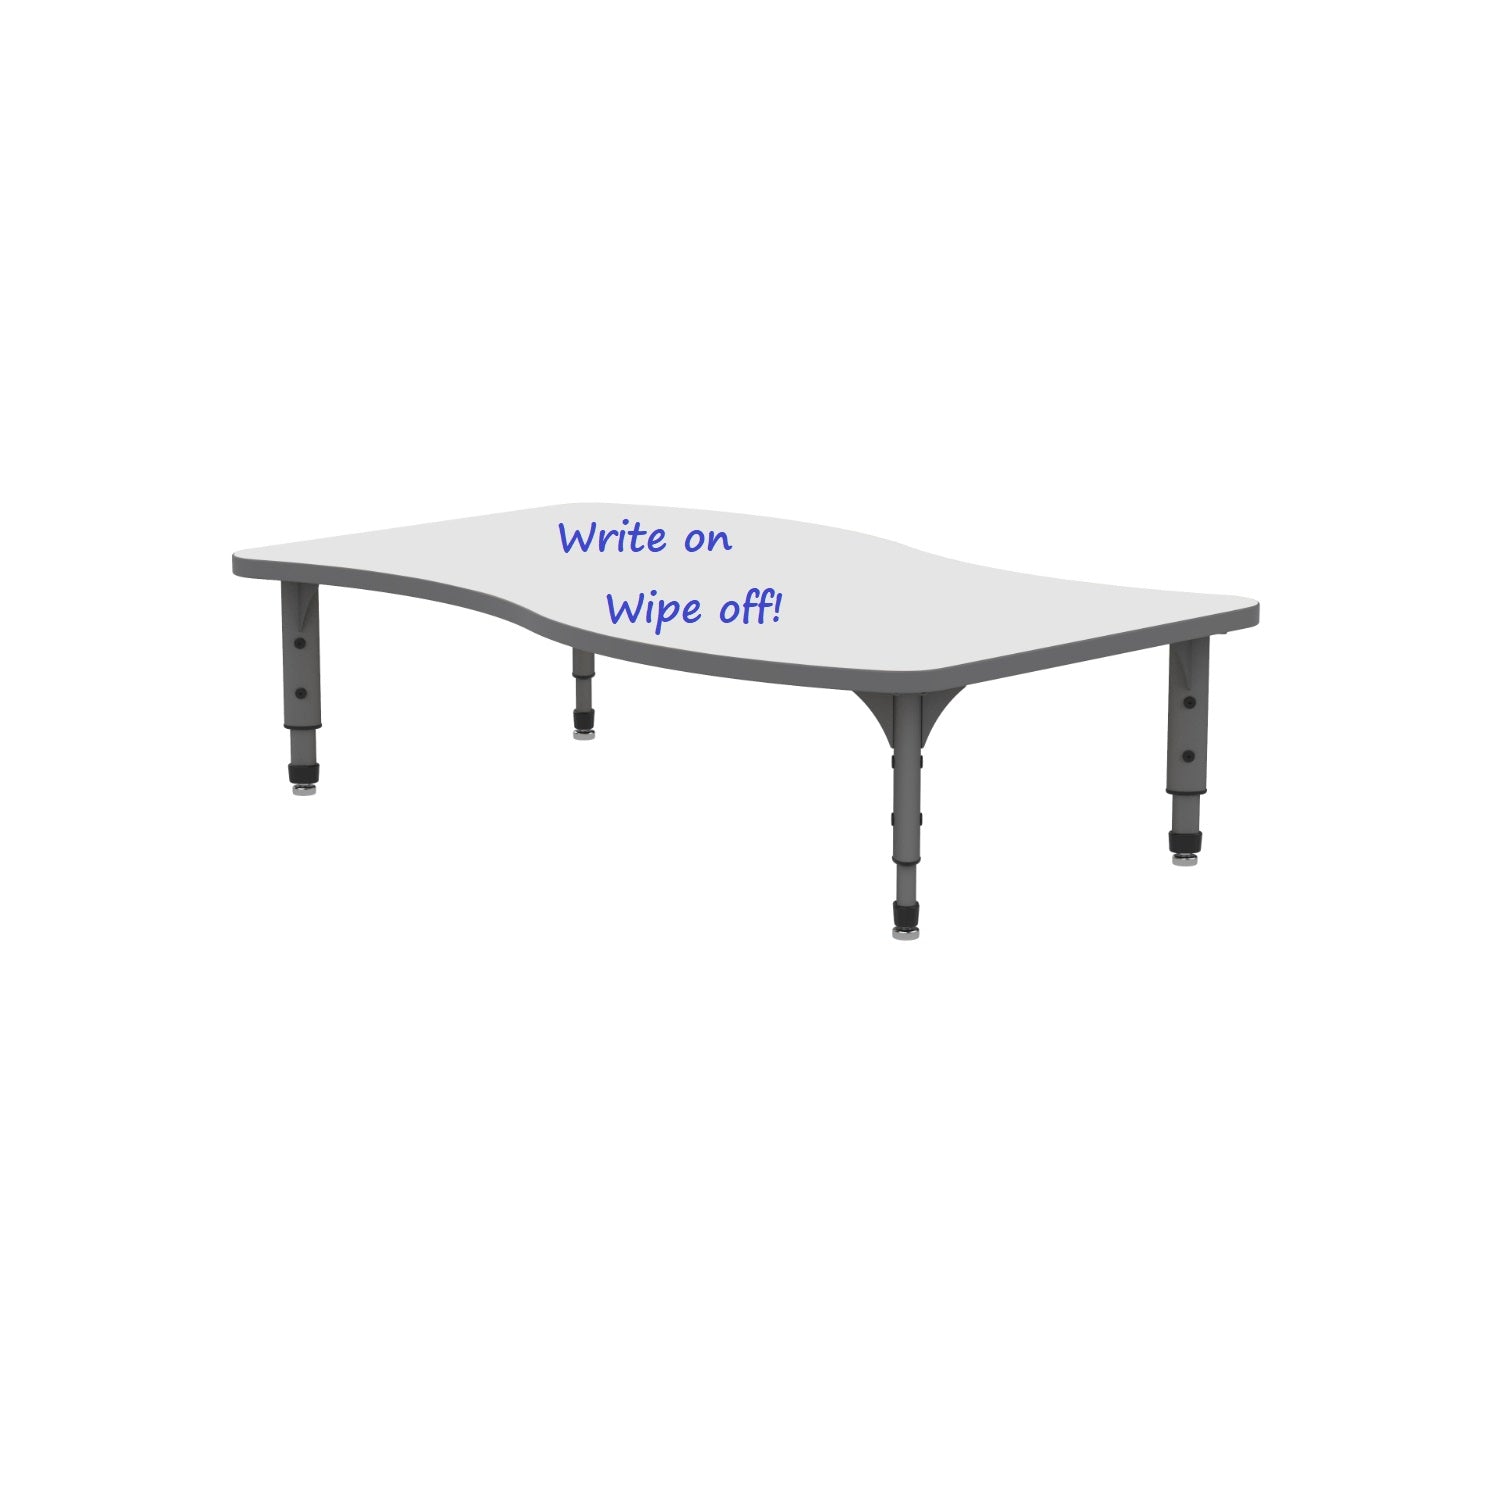 Adjustable Height Floor Activity Table with White Dry-Erase Markerboard Top, 30" x 54" Wave